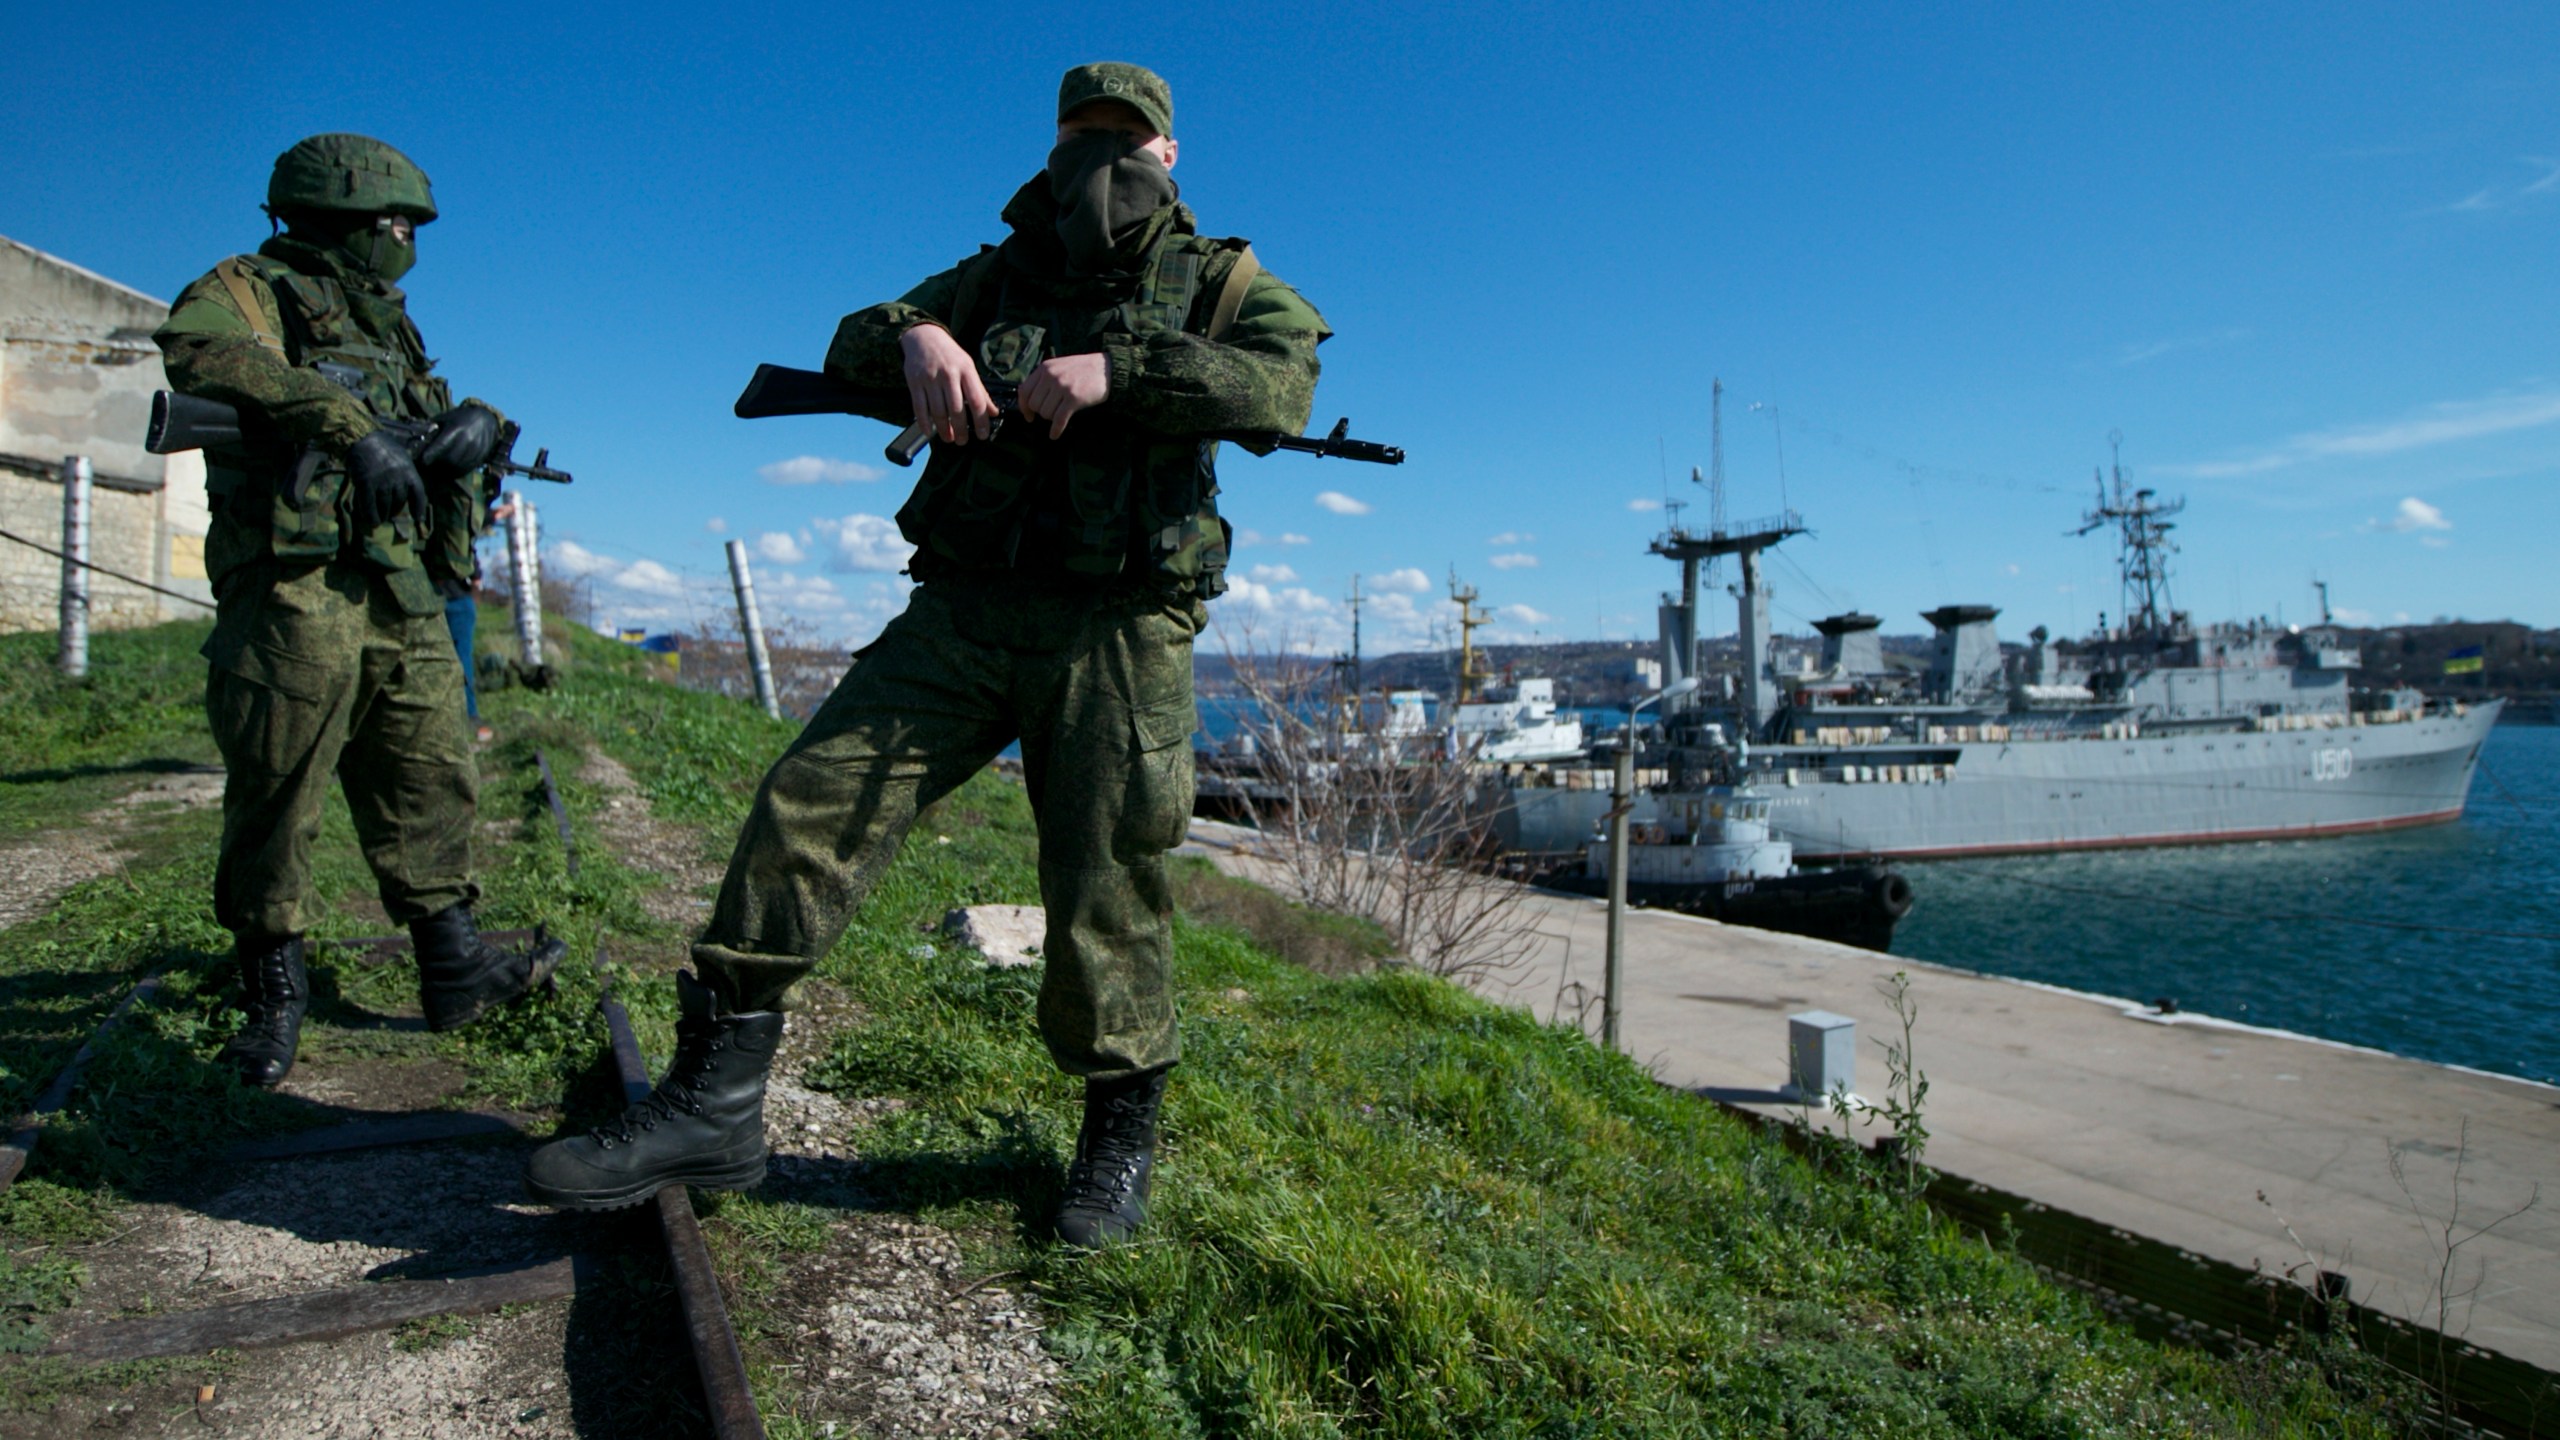 FILE - Russian soldiers guard a pier where two Ukrainian naval vessels are moored, in Sevastopol, Ukraine, on Wednesday, March 5, 2014. When Ukraine's Kremlin-friendly president was ousted in 2014 by mass protests that Moscow called a U.S.-instigated coup, Russian President Vladimir Putin responded by sending troops to overrun Crimea and staging a plebiscite on joining Russia, which the West dismissed as illegal. (AP Photo, File)